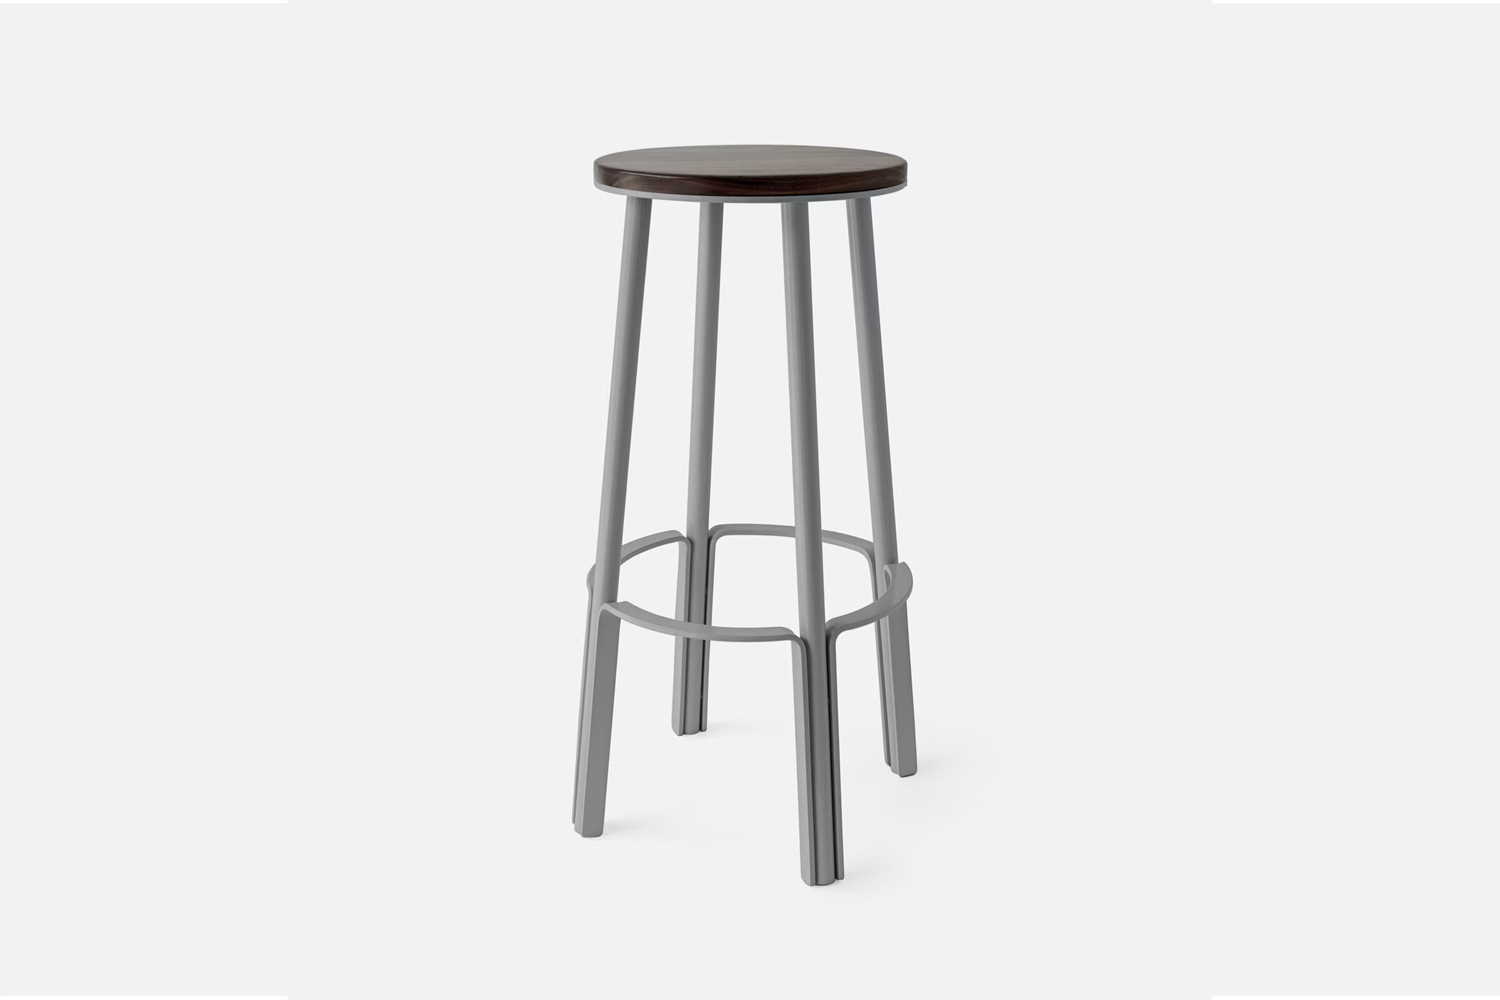 the makr factory stool, shown in pale gray, is \28 inches high; \$600 at makr. 19